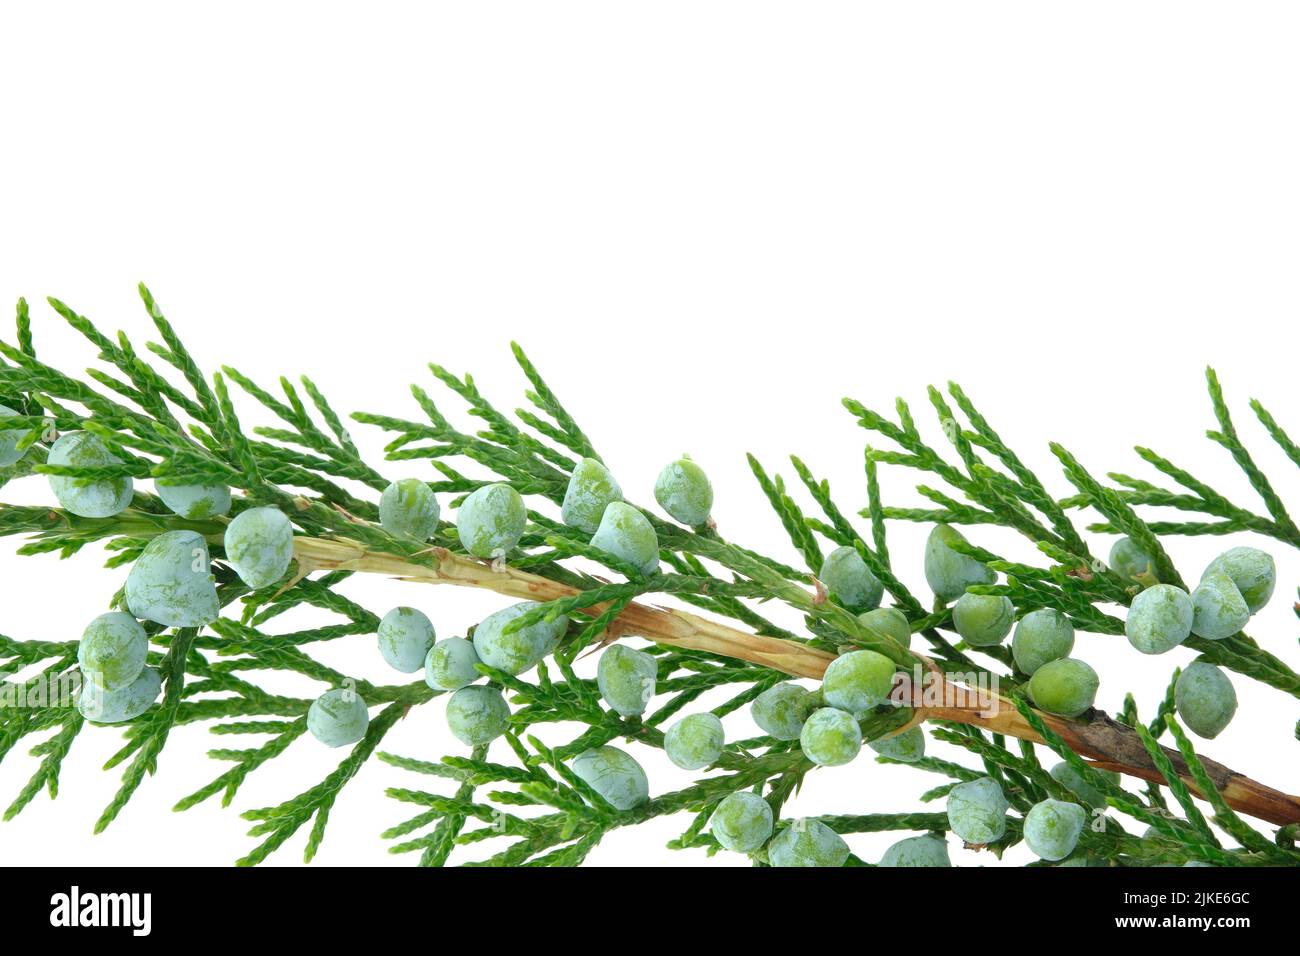 Juniper bush branch with berries isolated on white background. Stock Photo